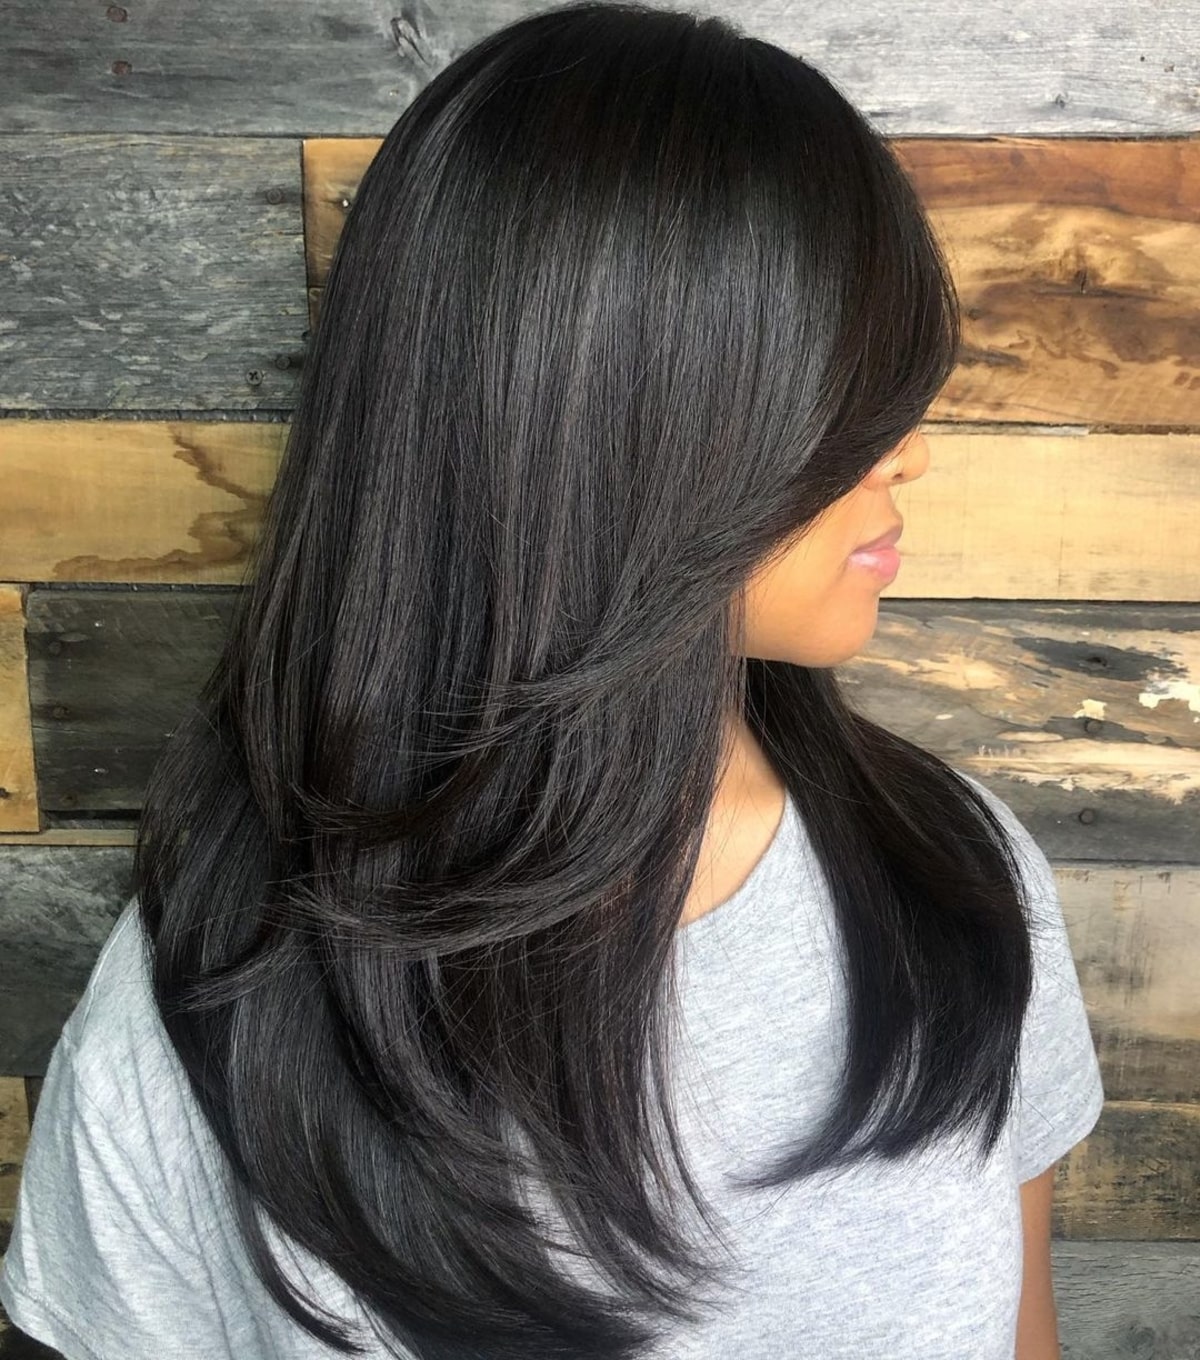 Cute Angled Cut with Long Side Bangs for Straight Hair